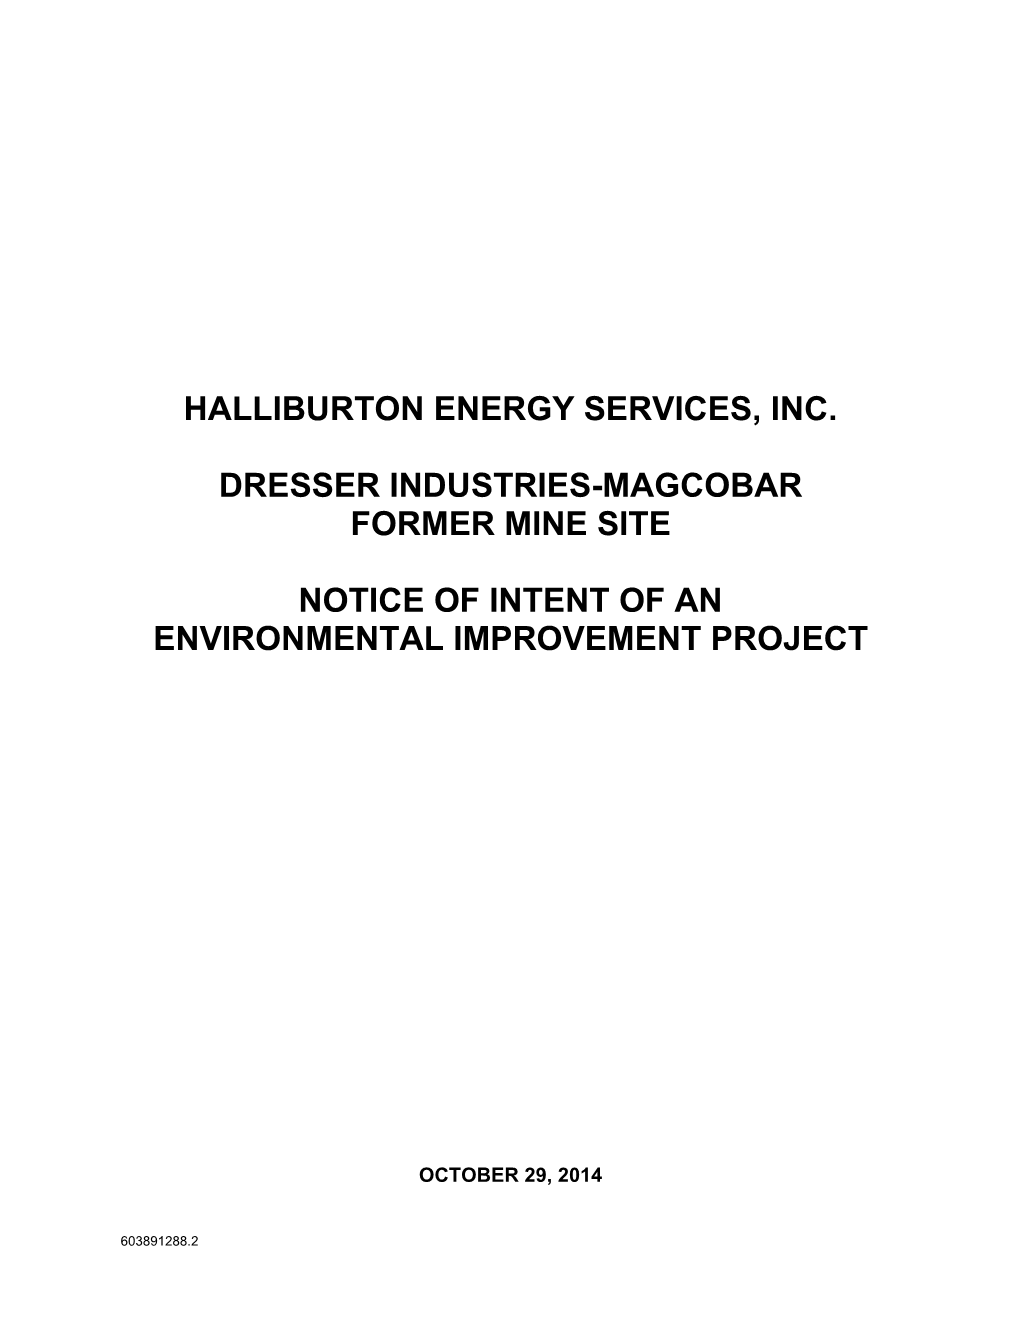 Halliburton Energy Services, Inc. Dresser Industries-Magcobar Former Mine Site Notice of Intent of an Environmental Improvement Project